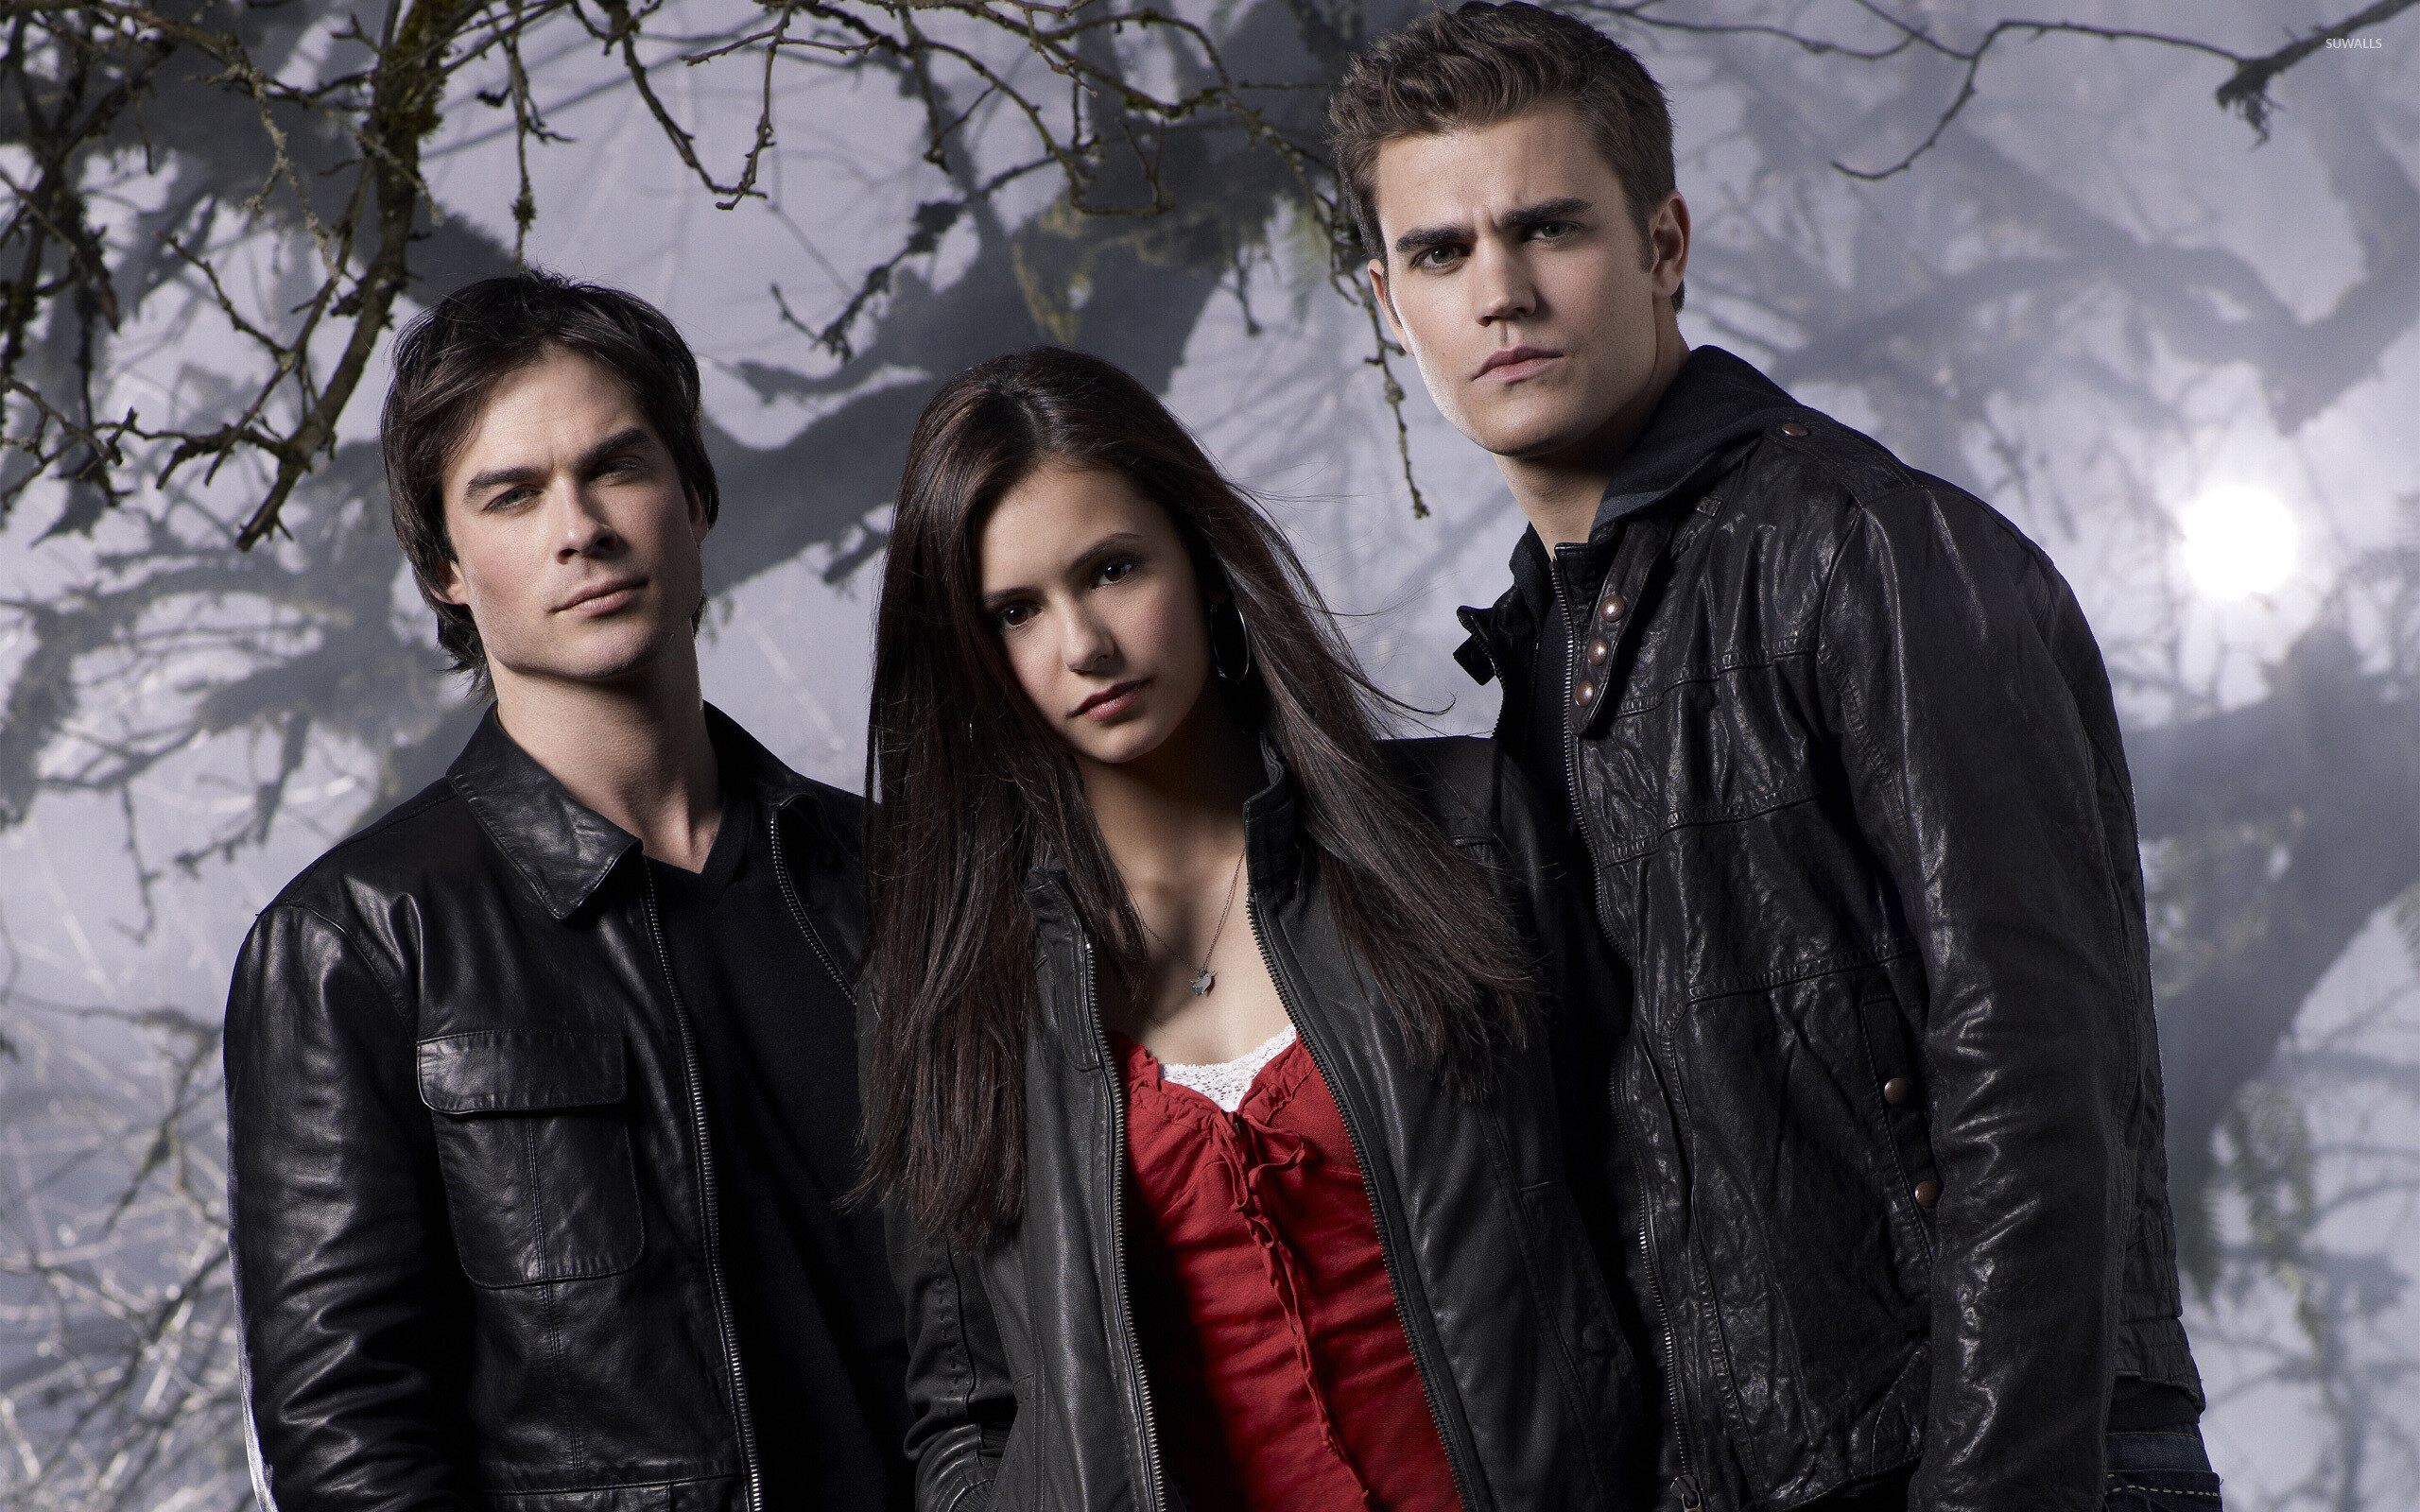 The Vampire Diaries (TV Series): Love Triangle, Fictional Characters Of The Novel by American Author L. J. Smith. 2560x1600 HD Wallpaper.